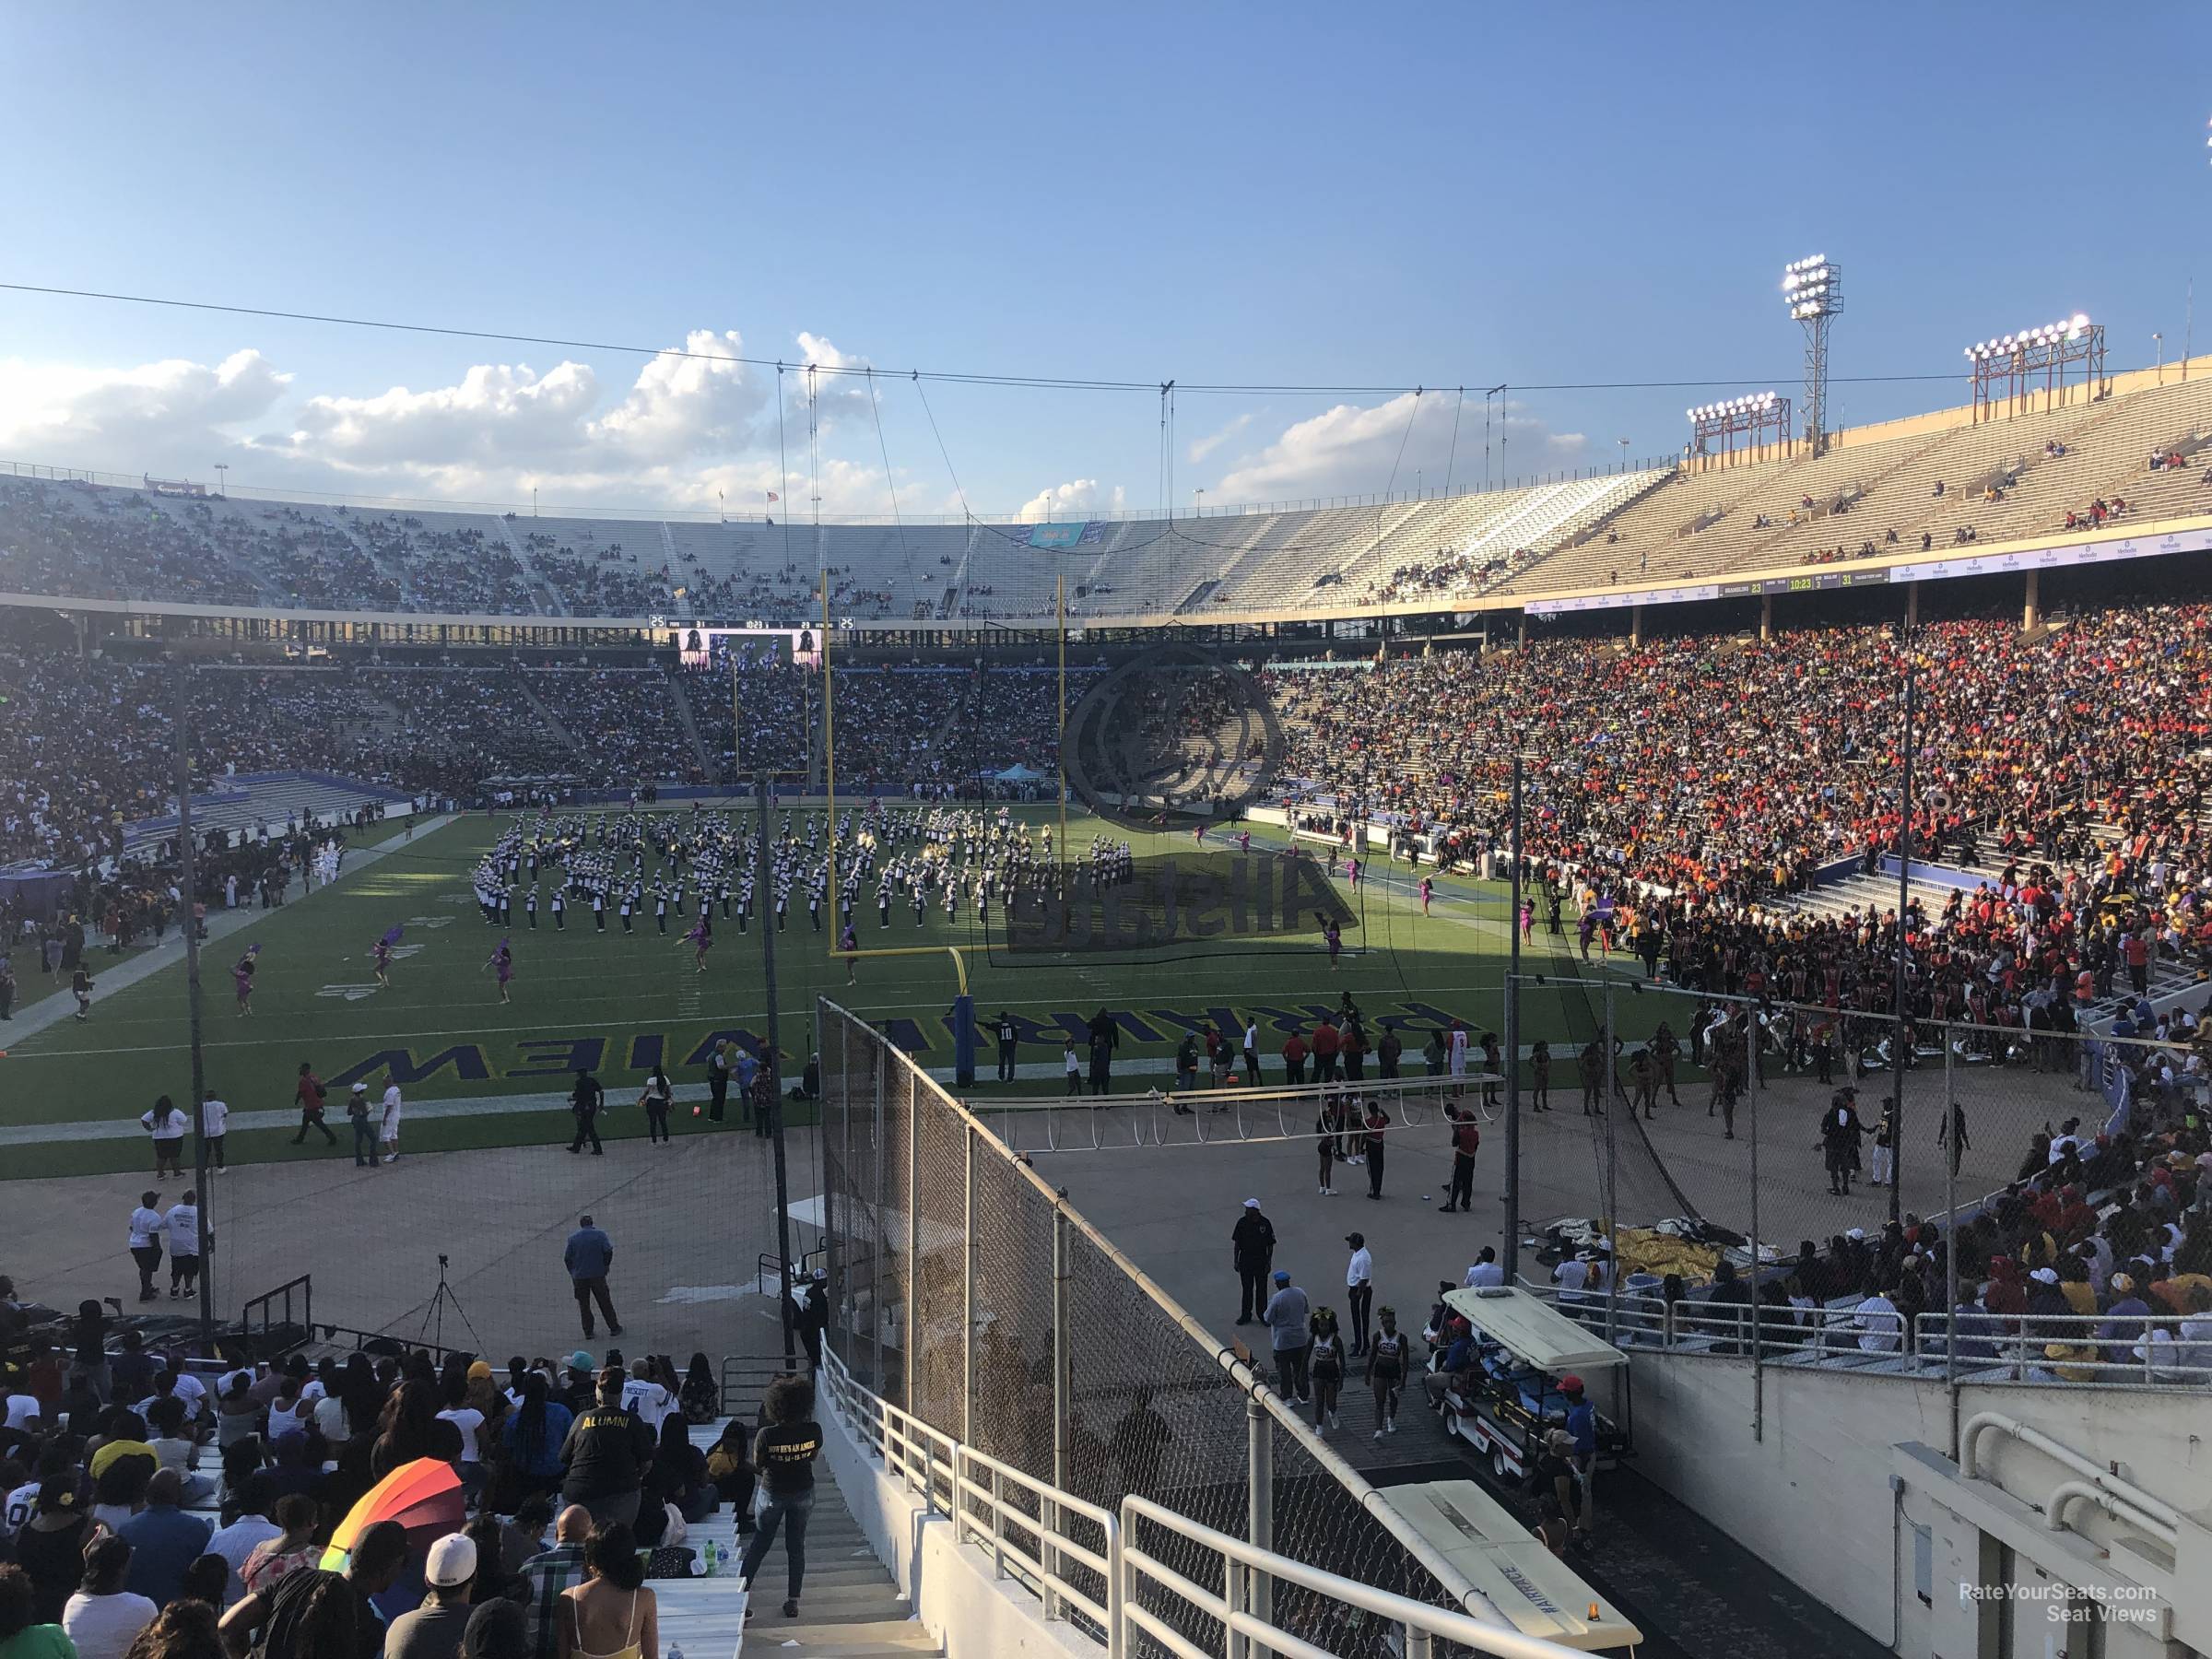 section 33, row 33 seat view  - cotton bowl